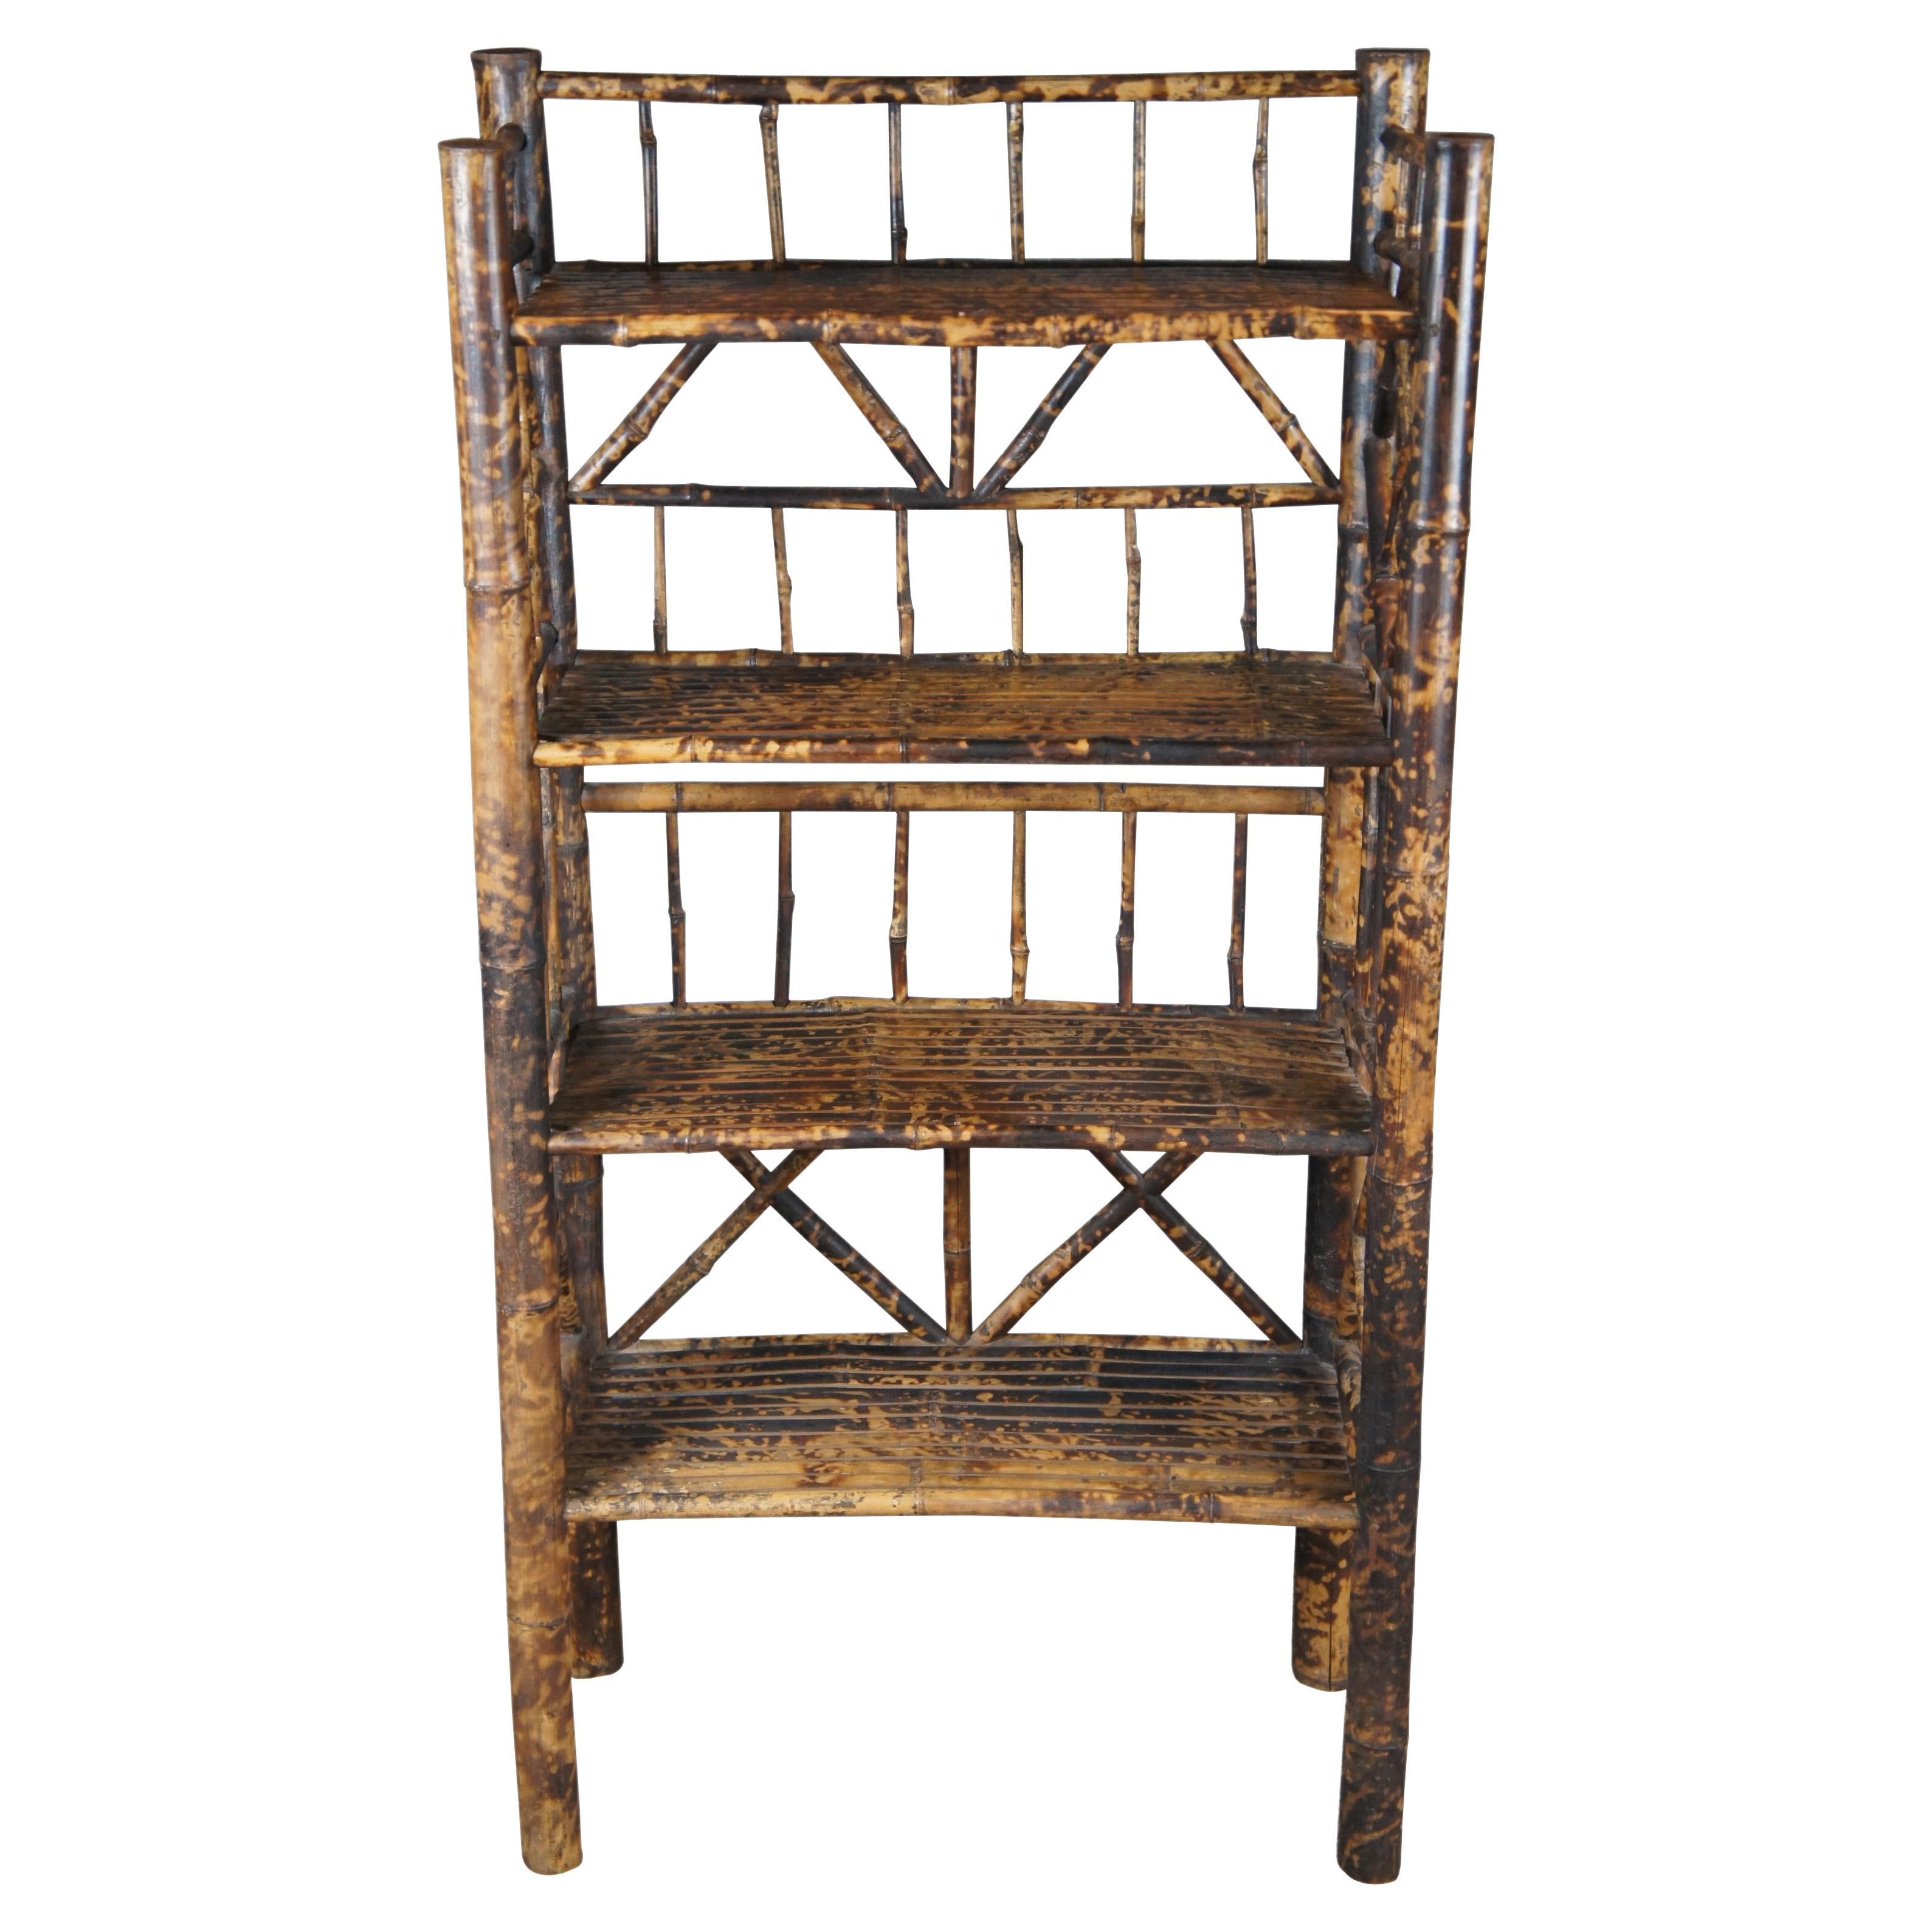 Antique Victorian Scorched Bamboo Library Bookshelf Bookcase Etagere Shelf 51"